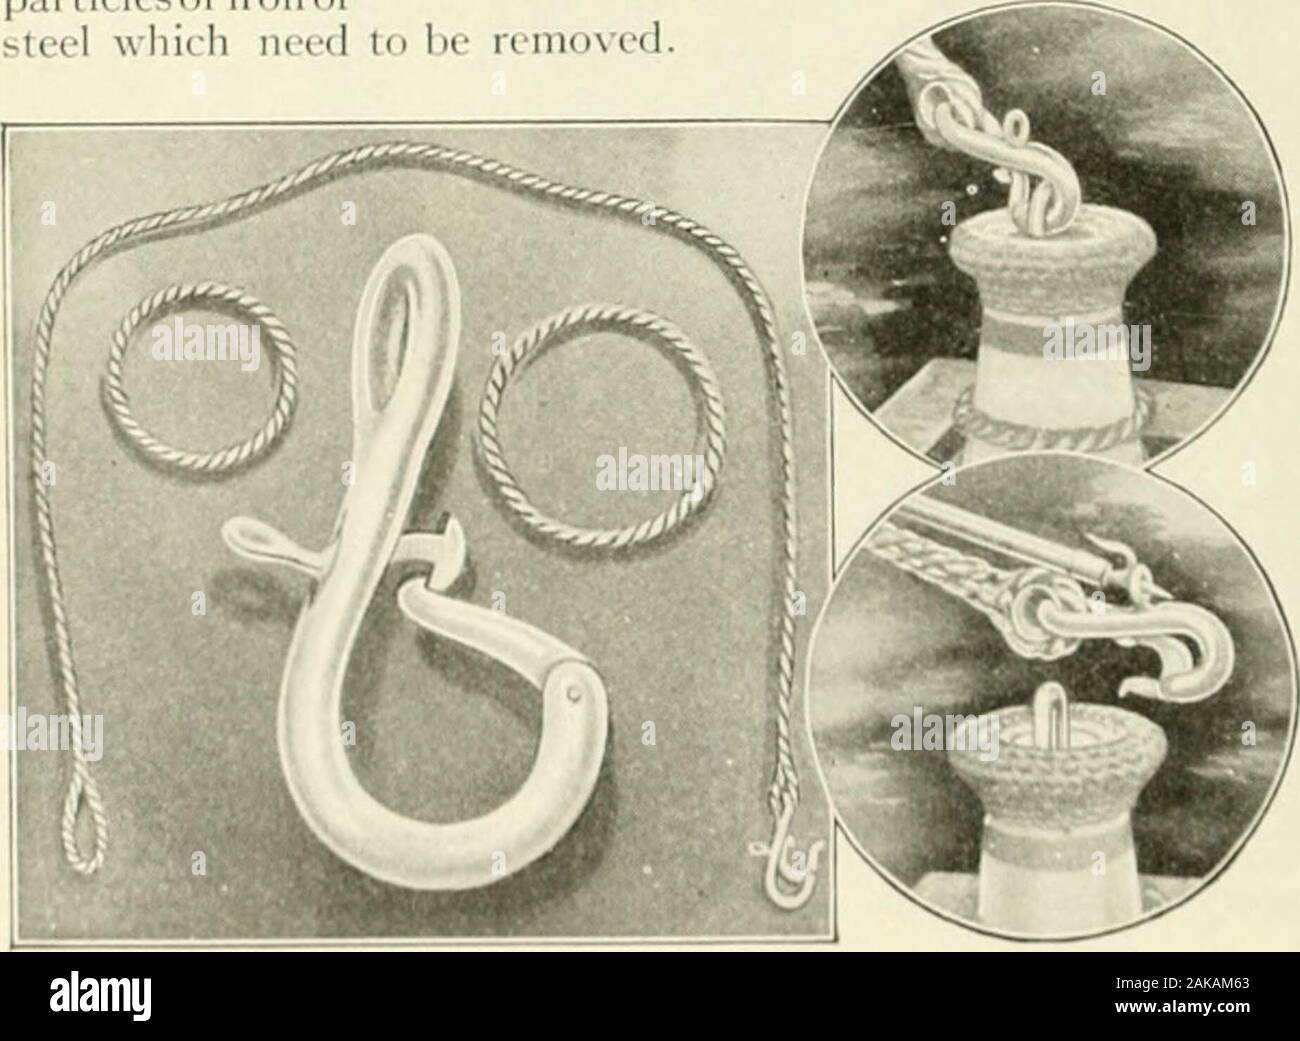 Popular science monthly . Where large quantities of brass and iron filings accumulate this magnet will be found invaluable for separating them remoei. THK harder the boatmoored on thenew self-locking moor-ing-hook pictured be-low pulls, the lesschance there is for theboat to get loose, inuse it is merely neces-sary to toss the hookinto the eebolt on thedock or buoy and theacht is fast, since itautomatically locks, al-though there arc nosprings in thedeice. Toloosen it a poke of theboat-hook is sufficient.The lock is composedof anordinar hook, tothe tip of which isattached a le-cr,which c Stock Photo